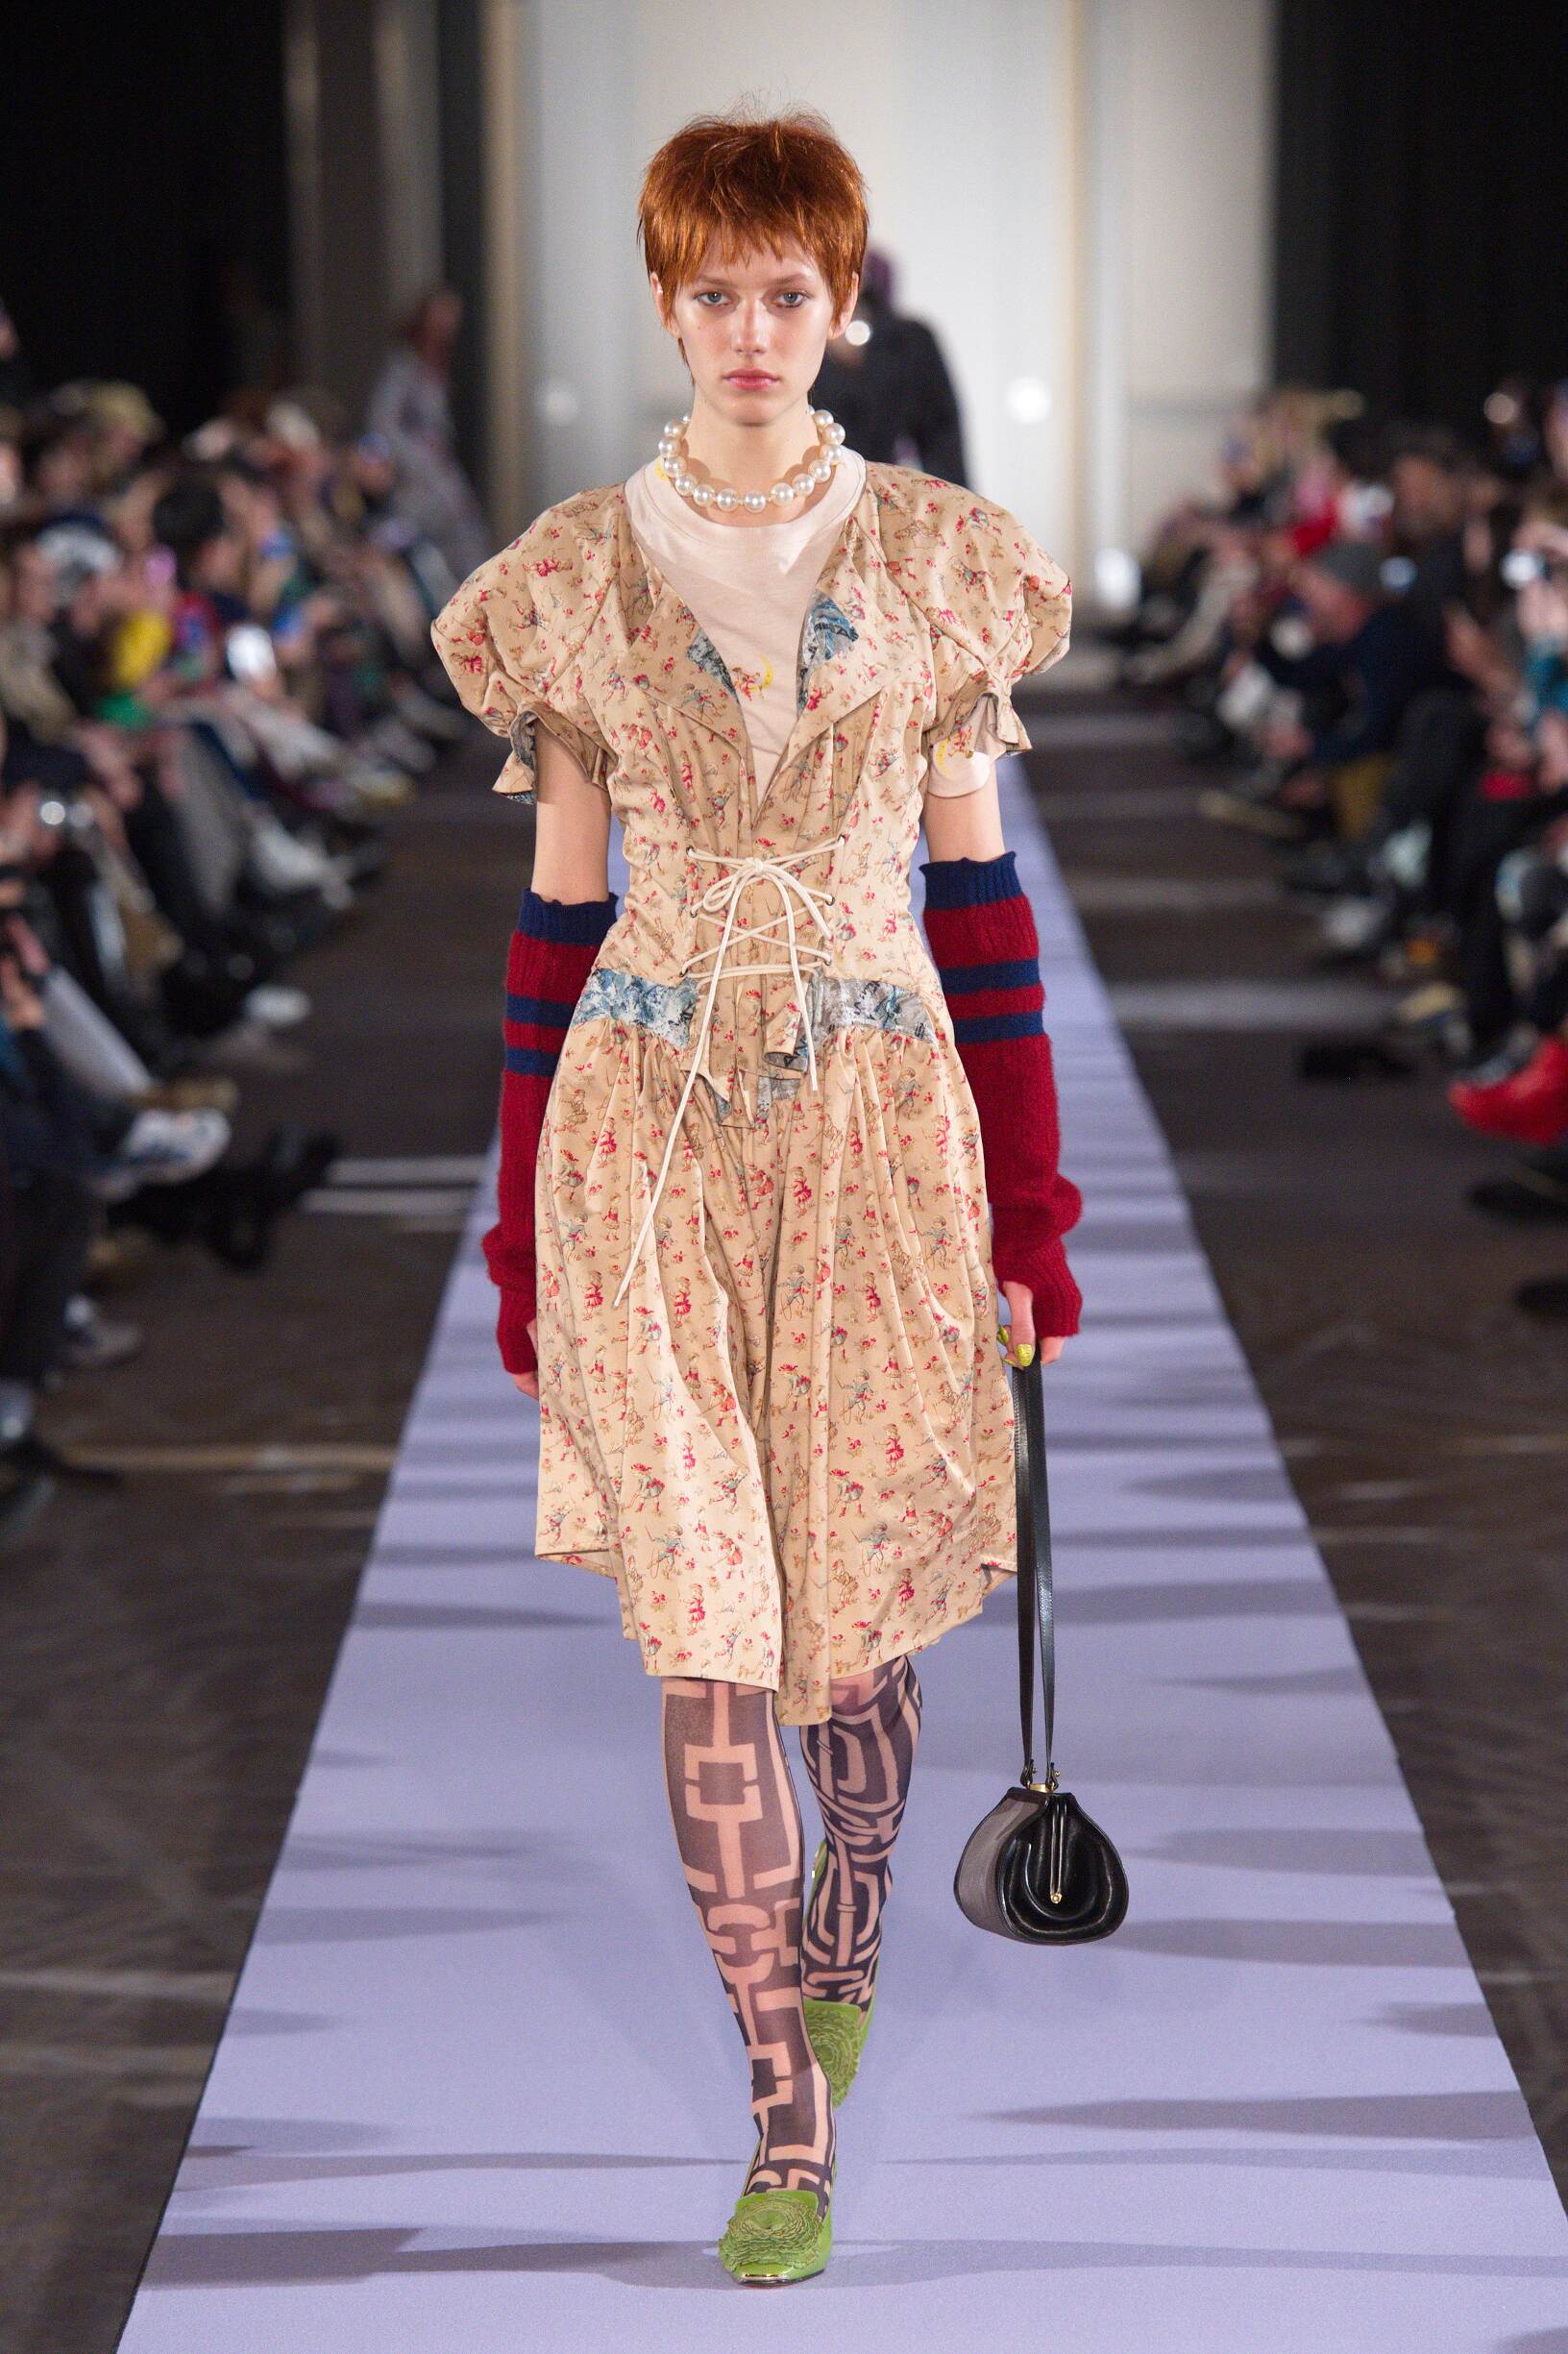 PFW SS19 Best Looks  Upcycled fashion, Fashion, Vivienne westwood